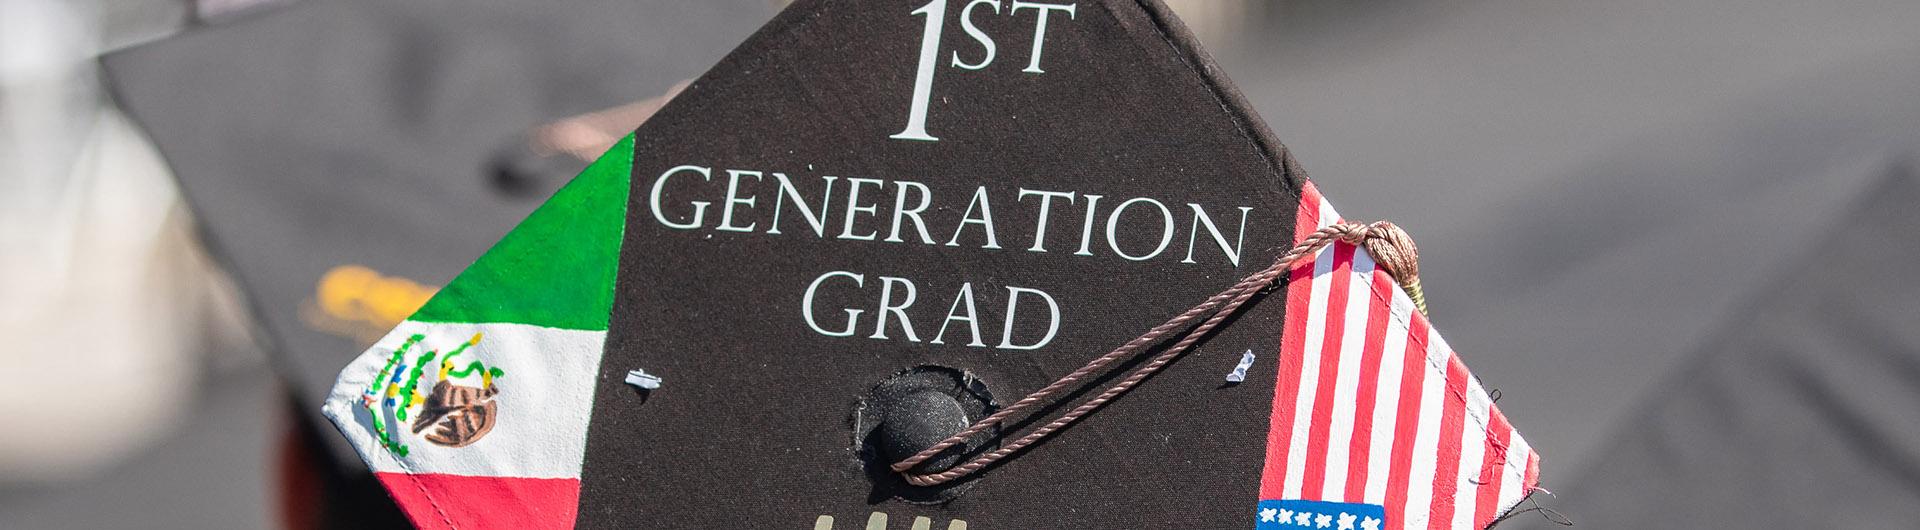 Student with motorboard message of 1st Generation Grad